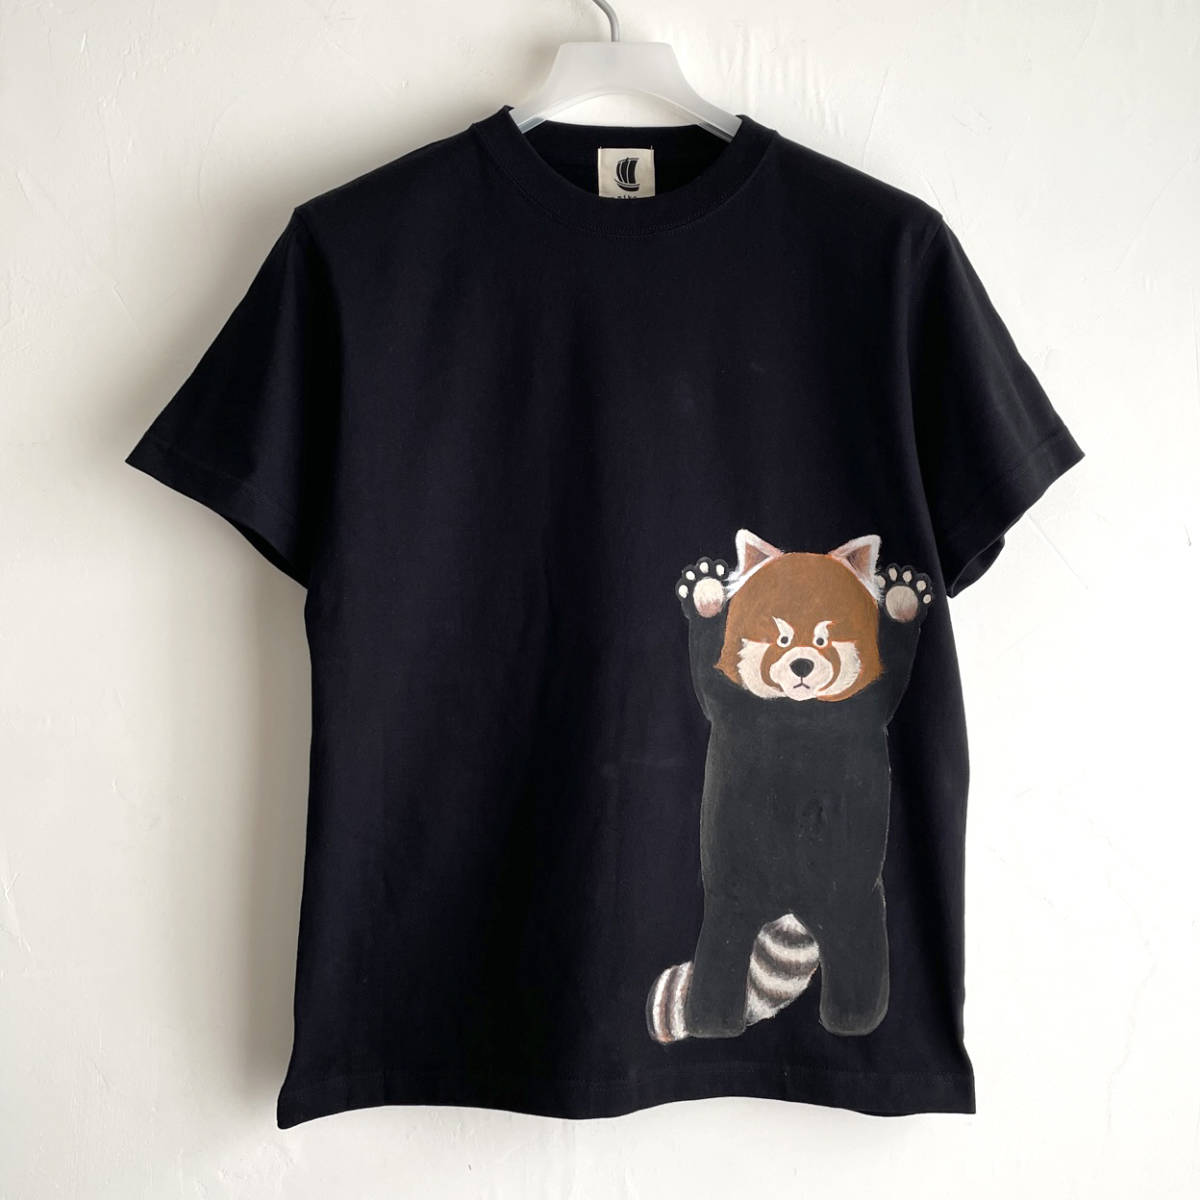 Men's T-shirt, XXL size, black, Lesser Pan pattern T-shirt, black, handmade, hand-painted T-shirt, animal, XL size and above, Crew neck, An illustration, character